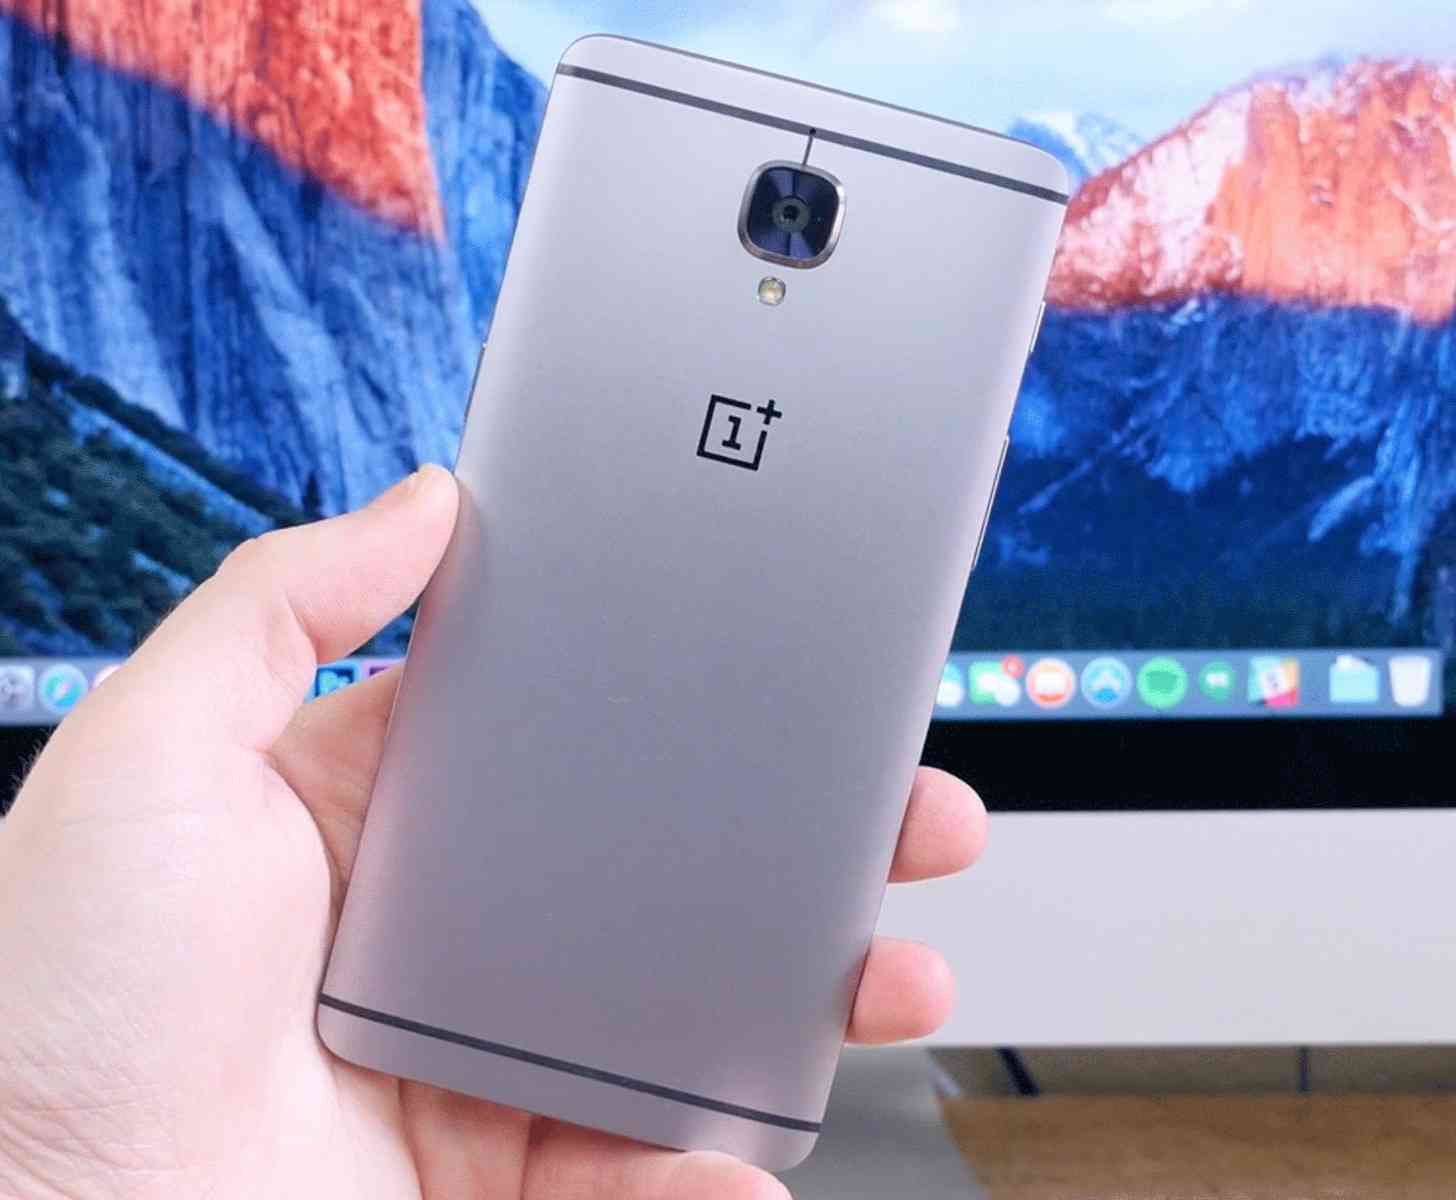 OnePlus 3 hands-on video